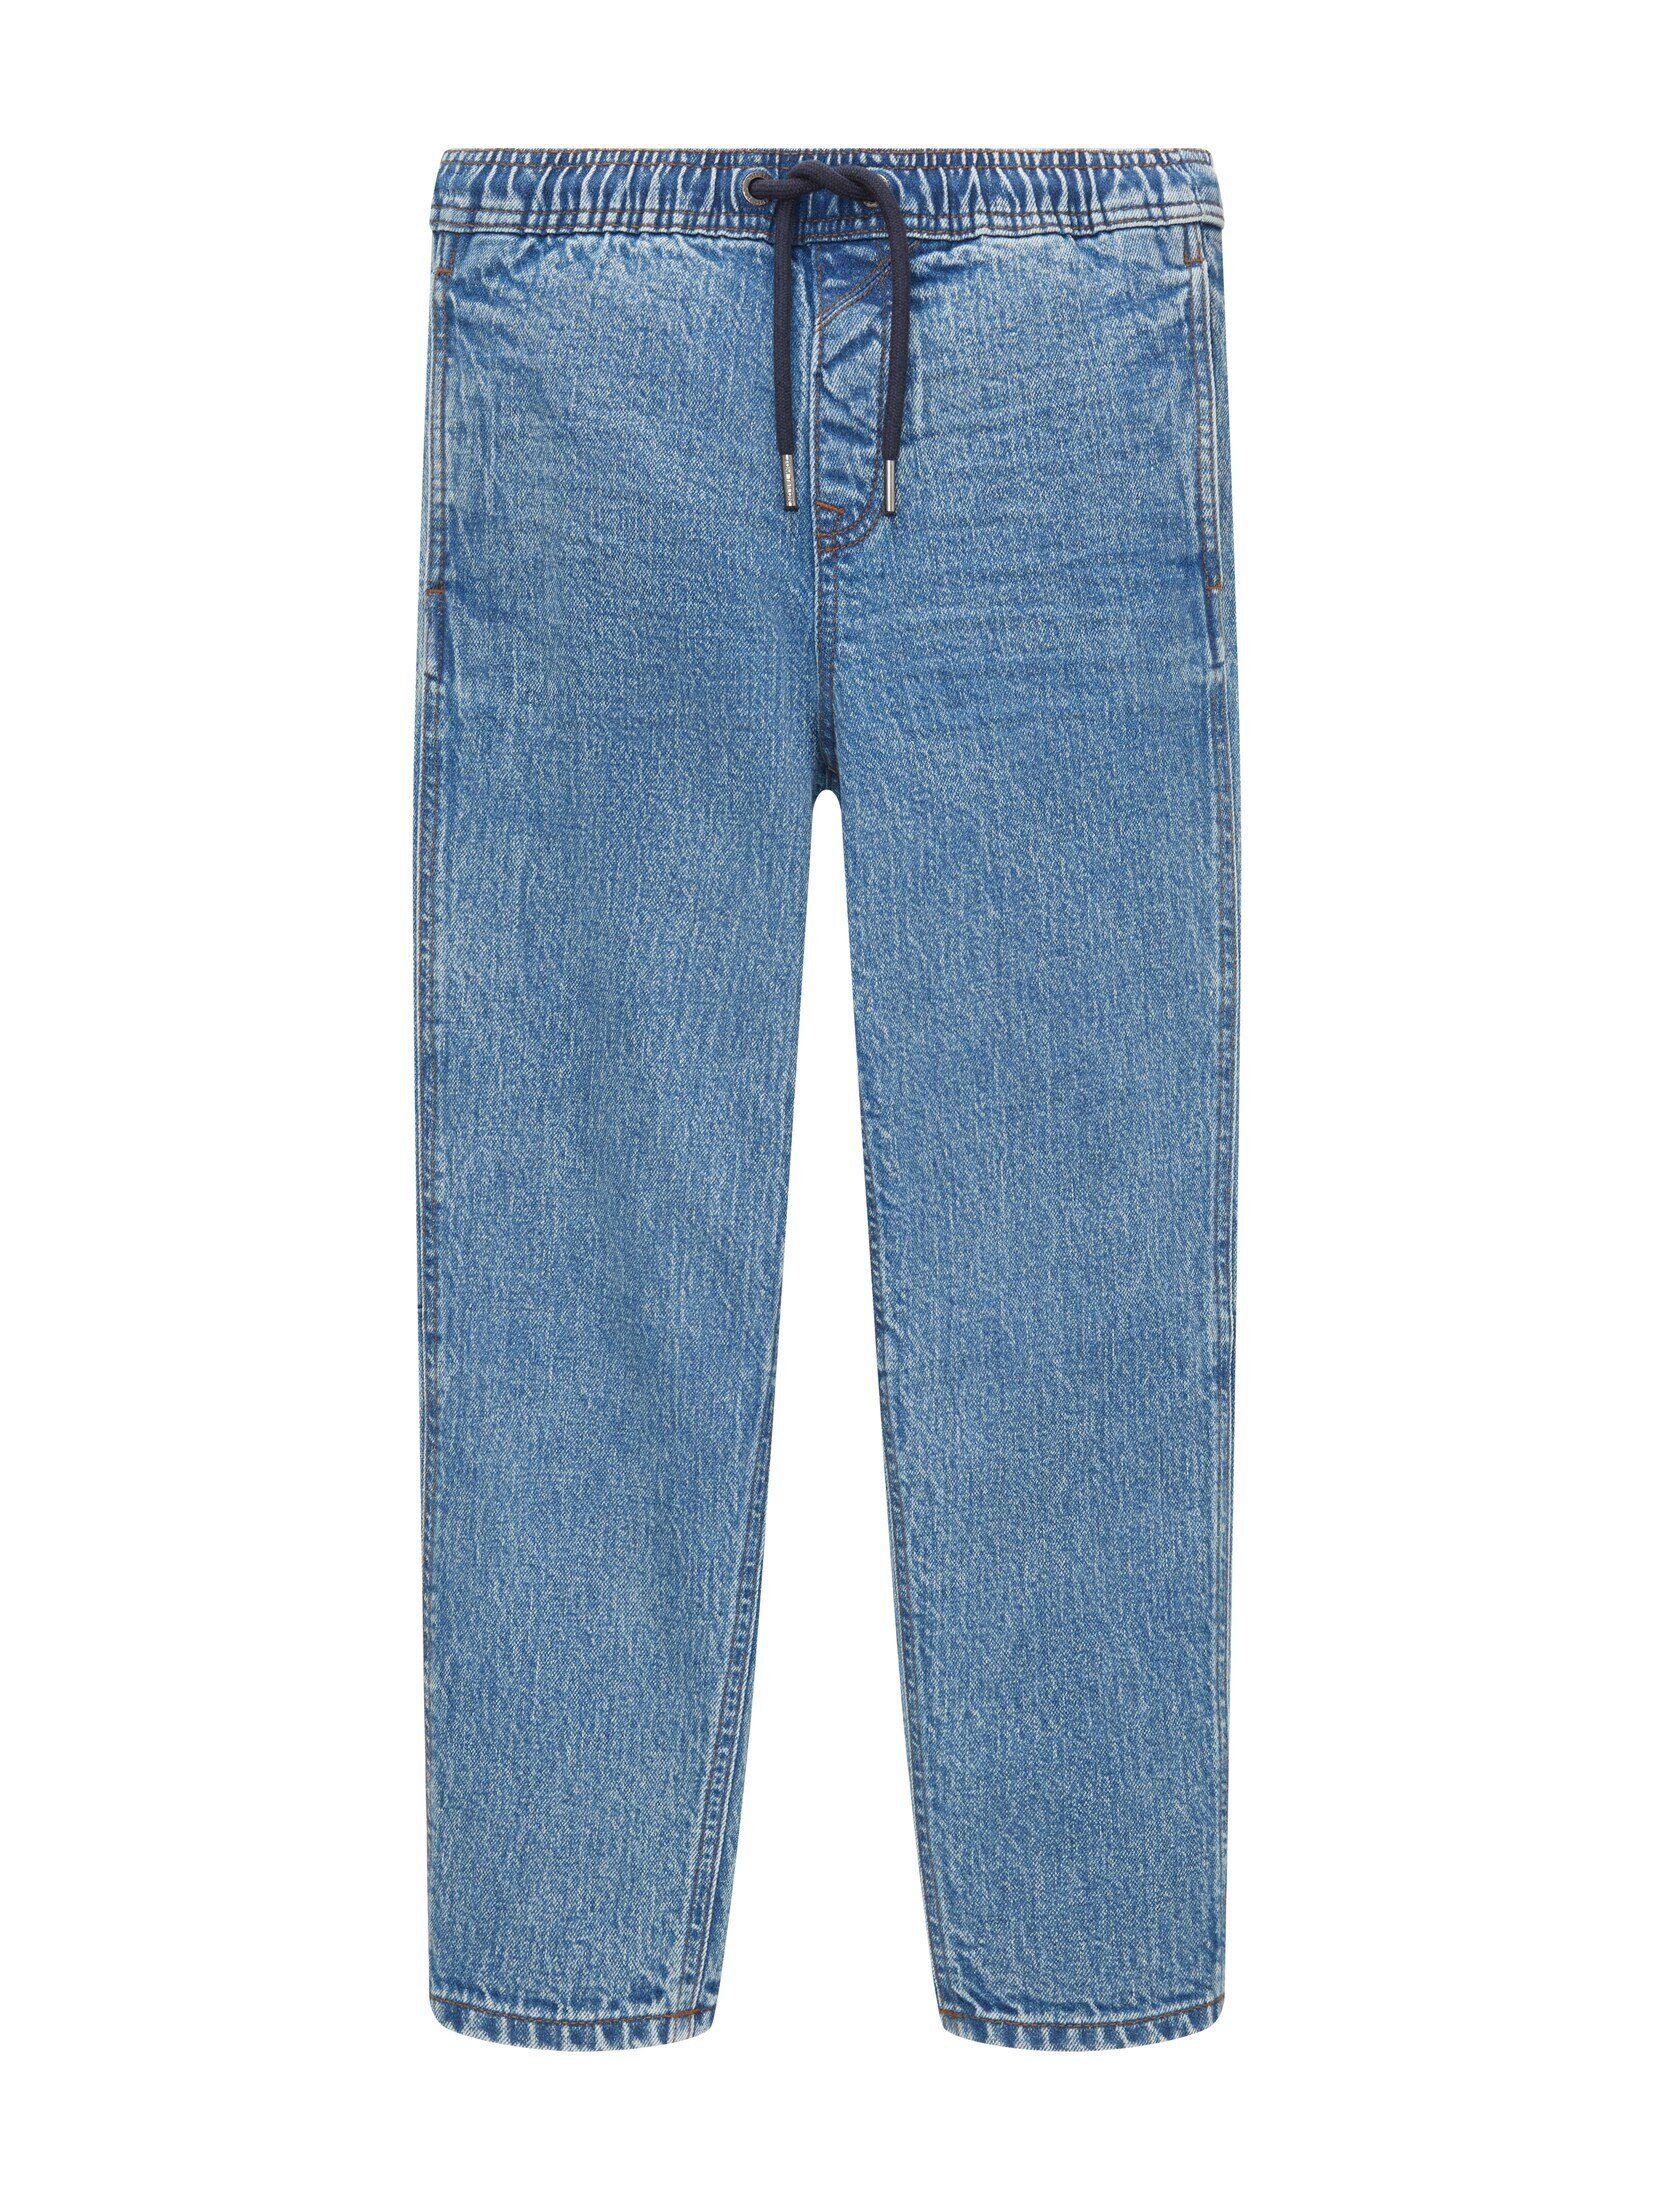 TOM TAILOR Gerade Jeans Relaxed Fit Jeans | Straight-Fit Jeans